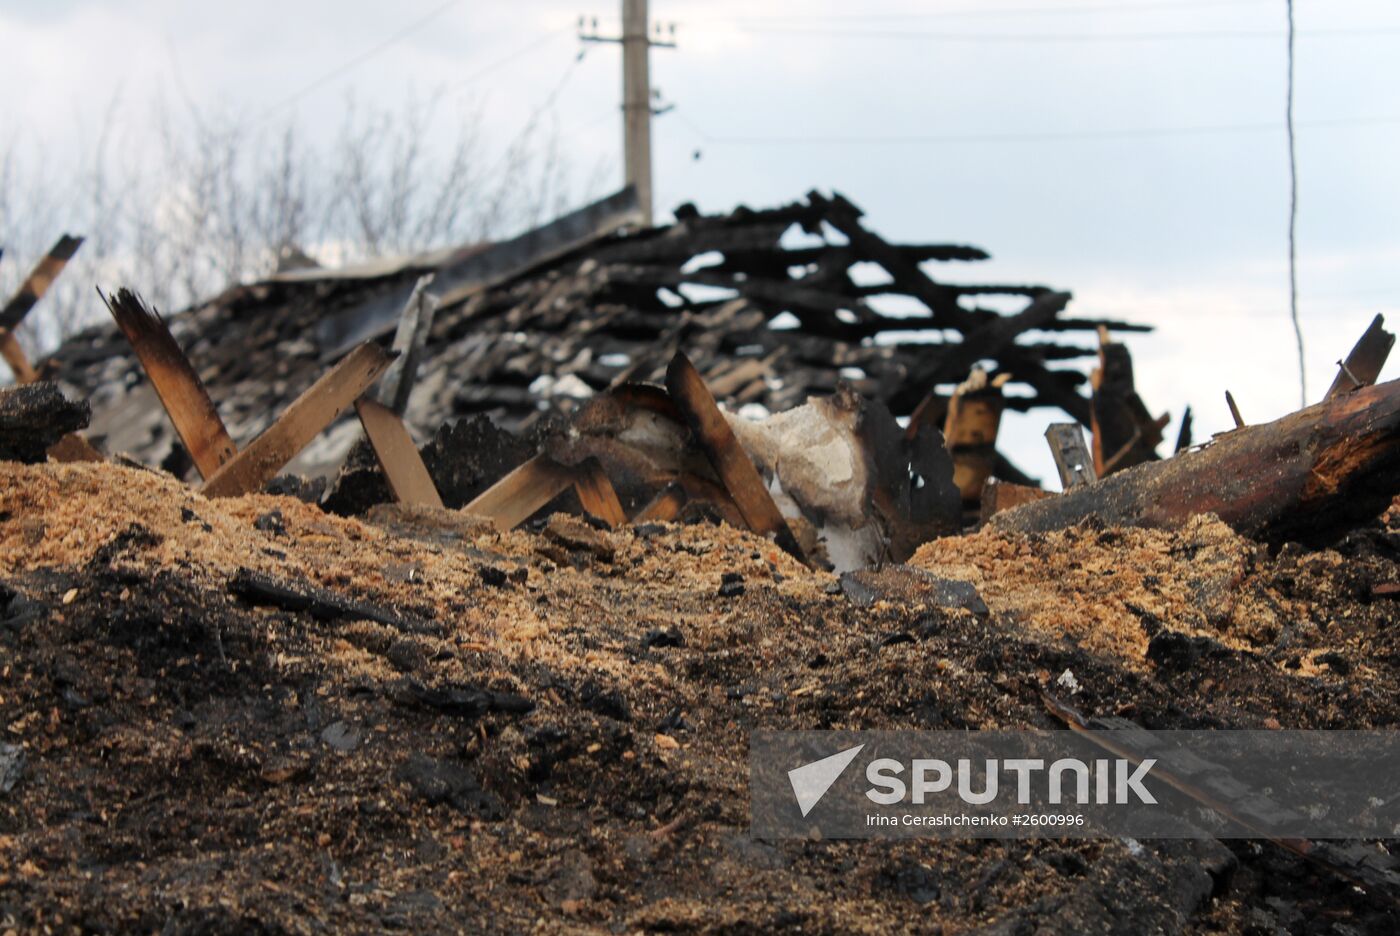 Consequences of shelling of Donetsk by Ukrainian security forces